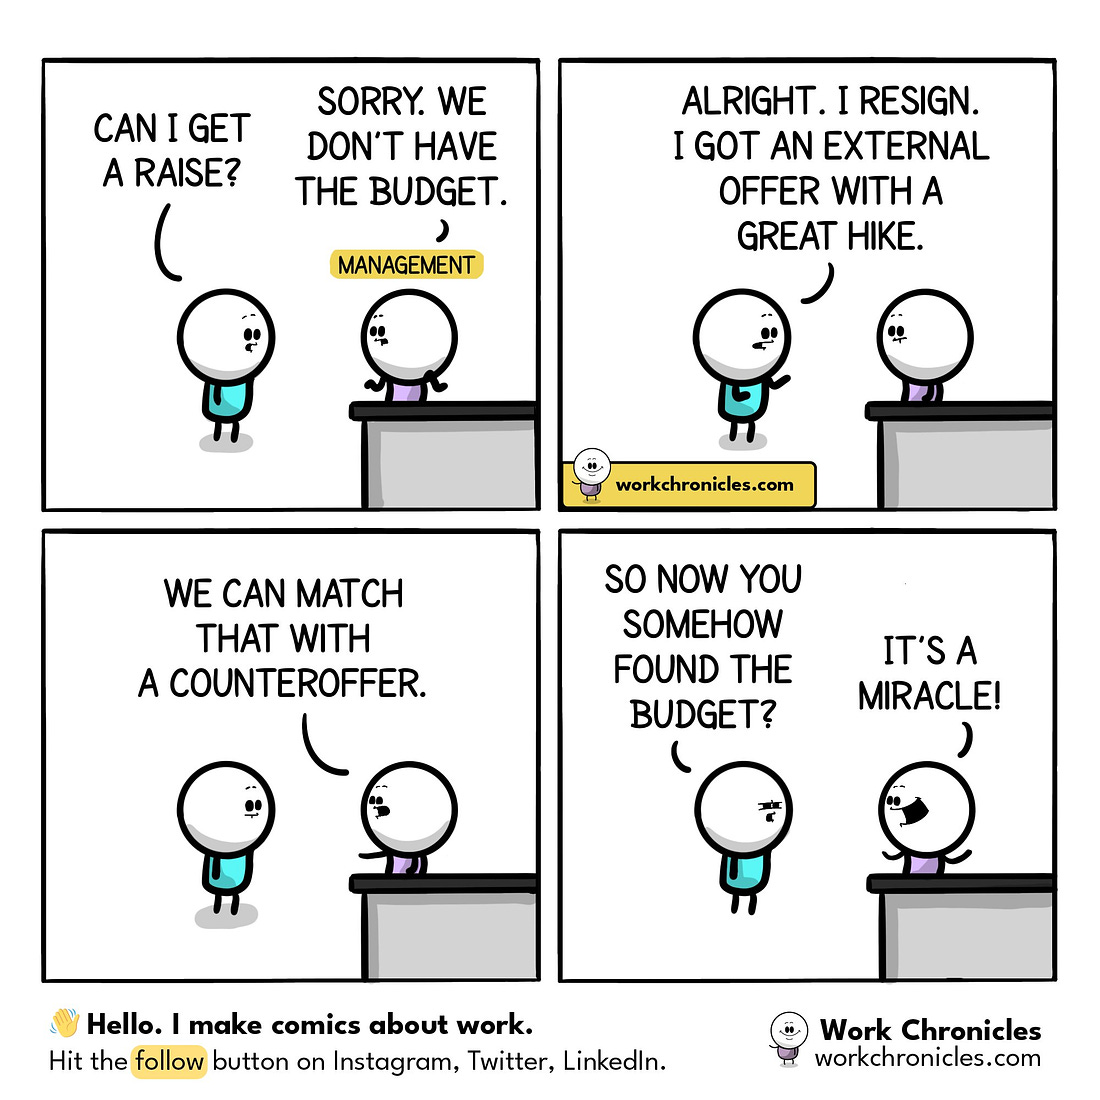 Panel 1: Bob asks for a raise. Manager declines stating they don't have the budget. Panel 2: Bob resigns because he got an external offer with a greak hike. Panel 3: Manager says that they can match that with a counter offer Panel 4: Bob asks how they found the budget now? Manager screams it's a miracle.